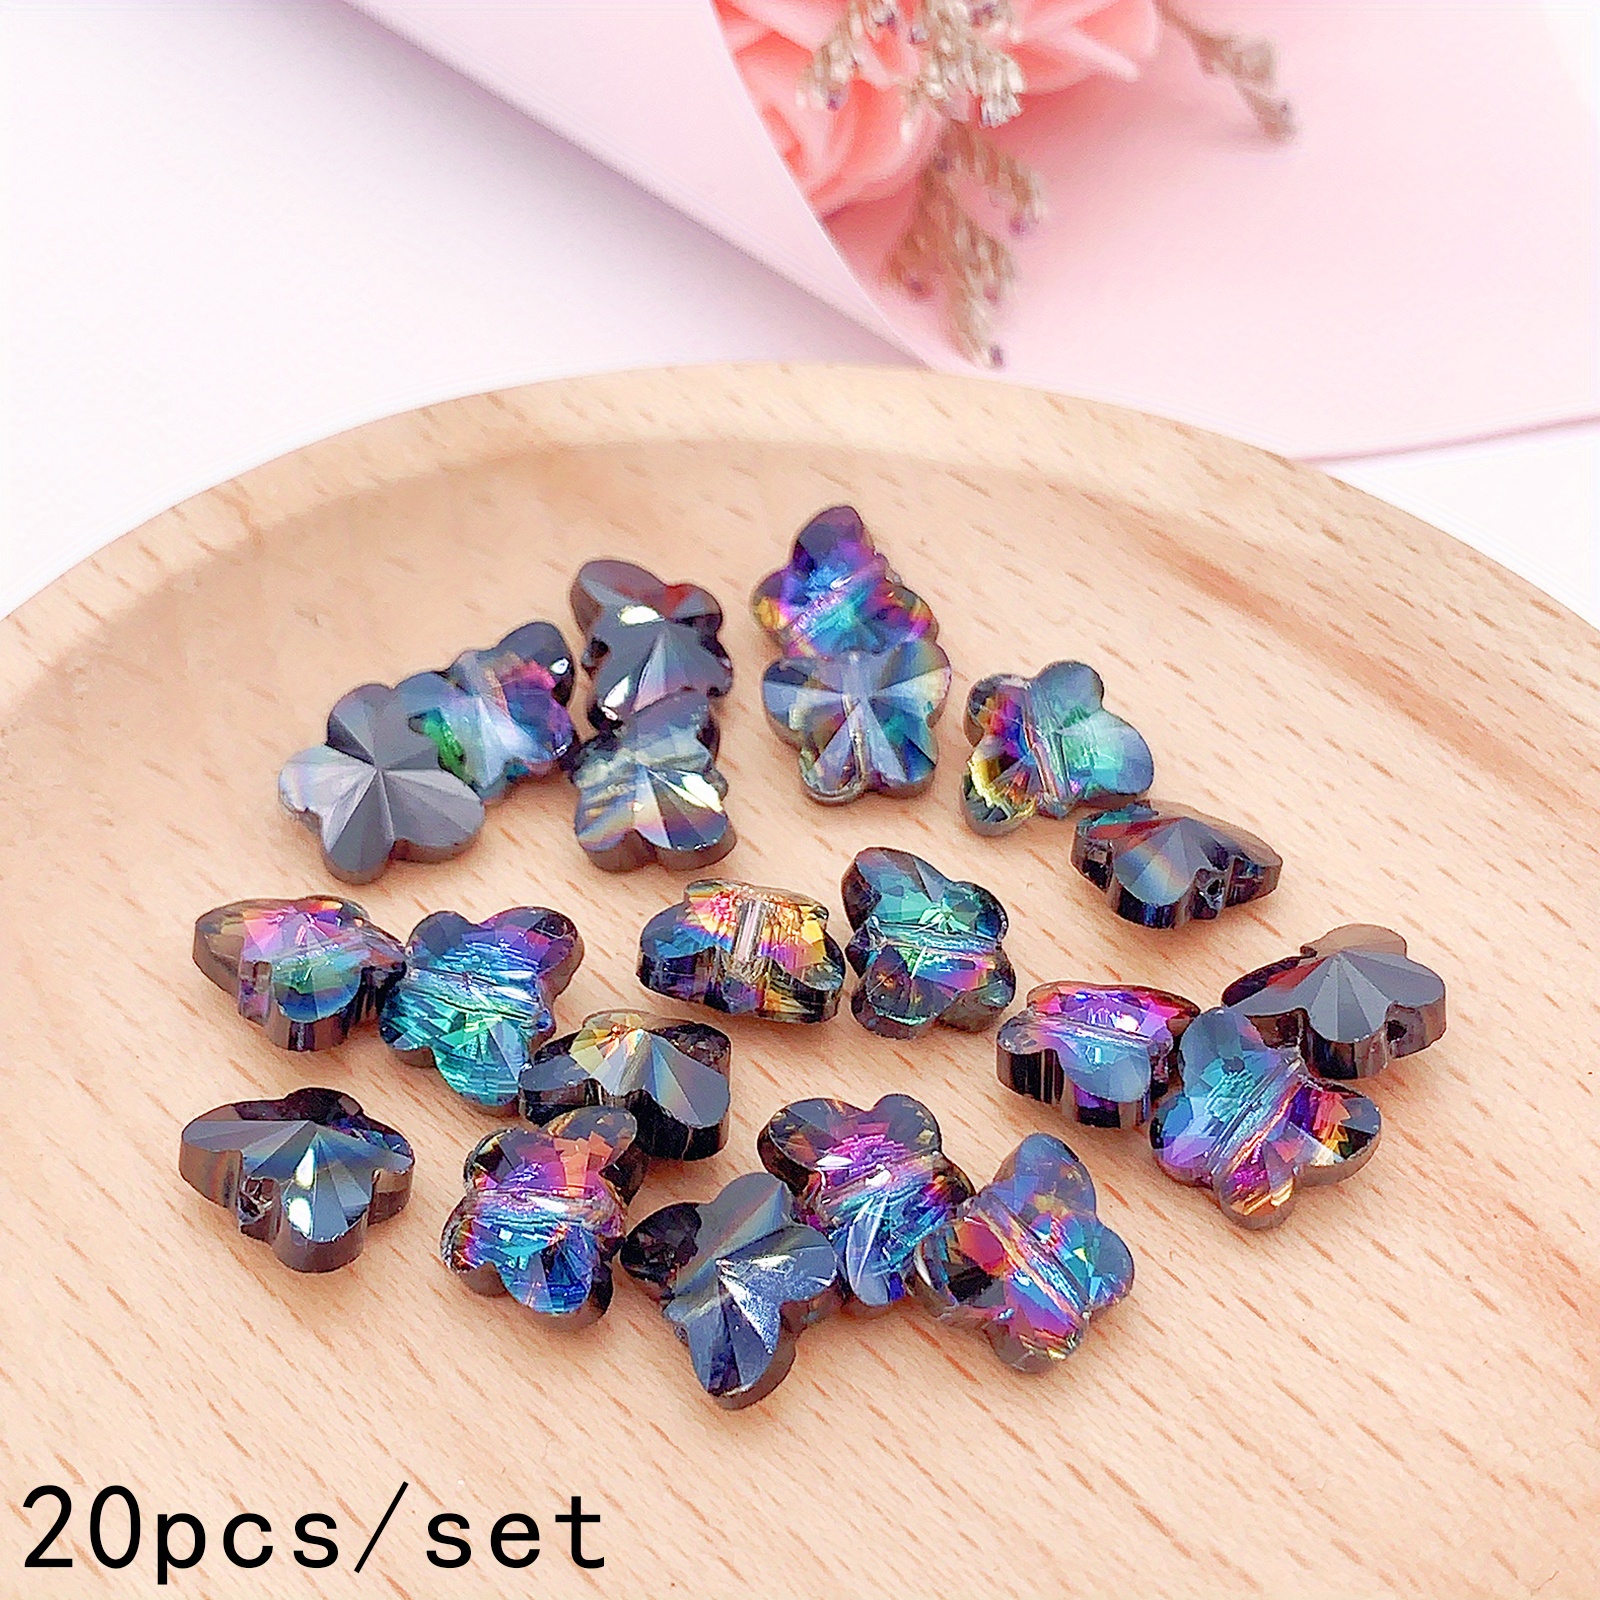 Yolev 200pcs Butterfly Beads Butterfly Crystal Beads for Jewelry Making  Bulk Butterfly Spacer Beads Butterfly Loose Beads for Earring Bracelet